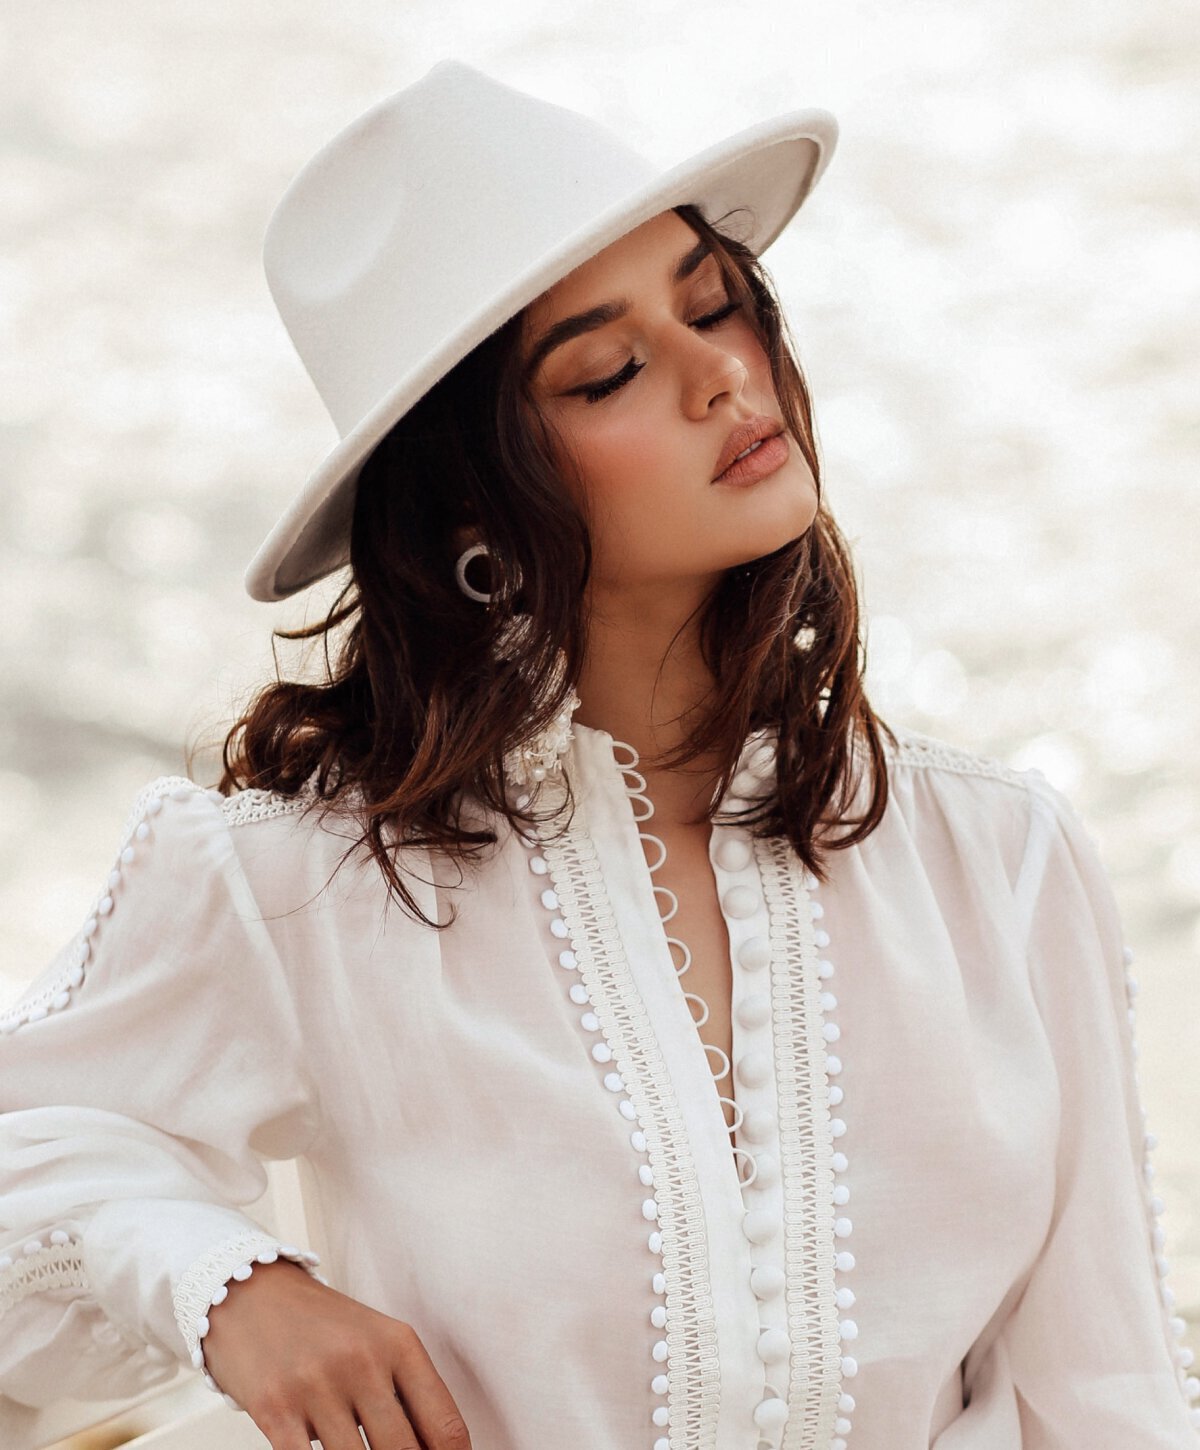 blow lift model wearing white shirt and hat